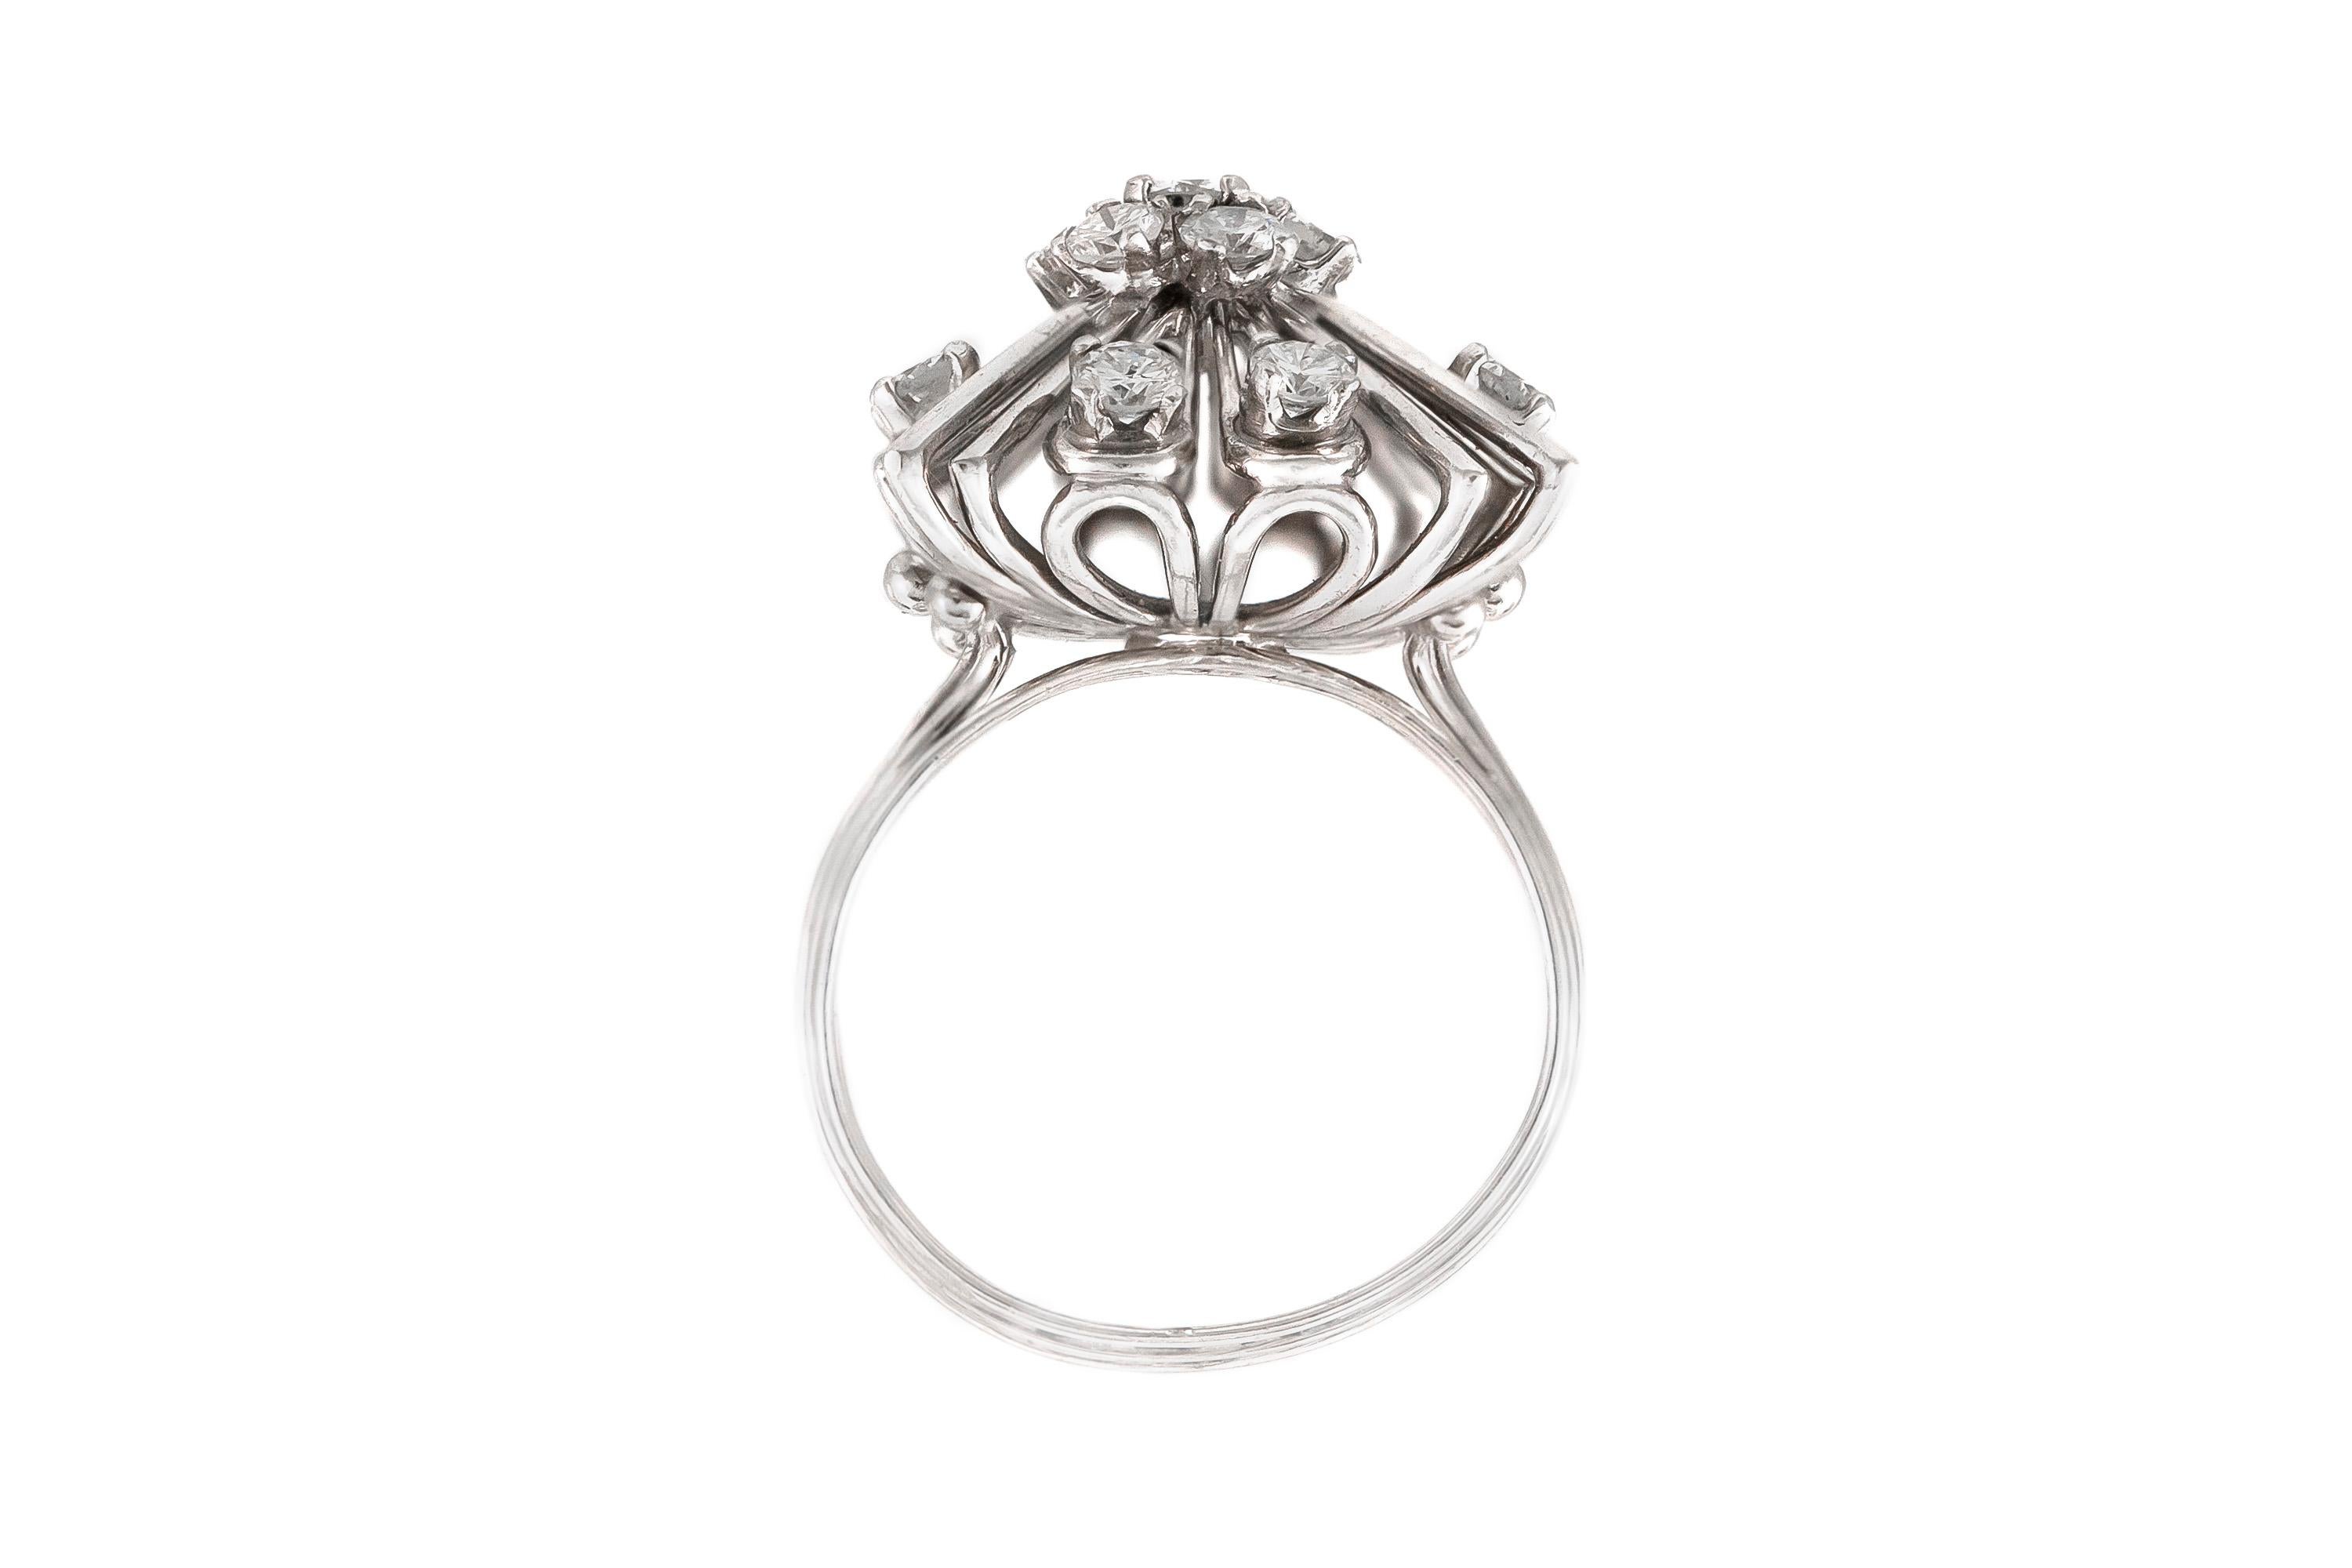 The ring is finely crafted in platinum with diamonds weighing approximately total of 1.60 carat.
Size 8.00 ( easy to resize )
Circa 1950'S